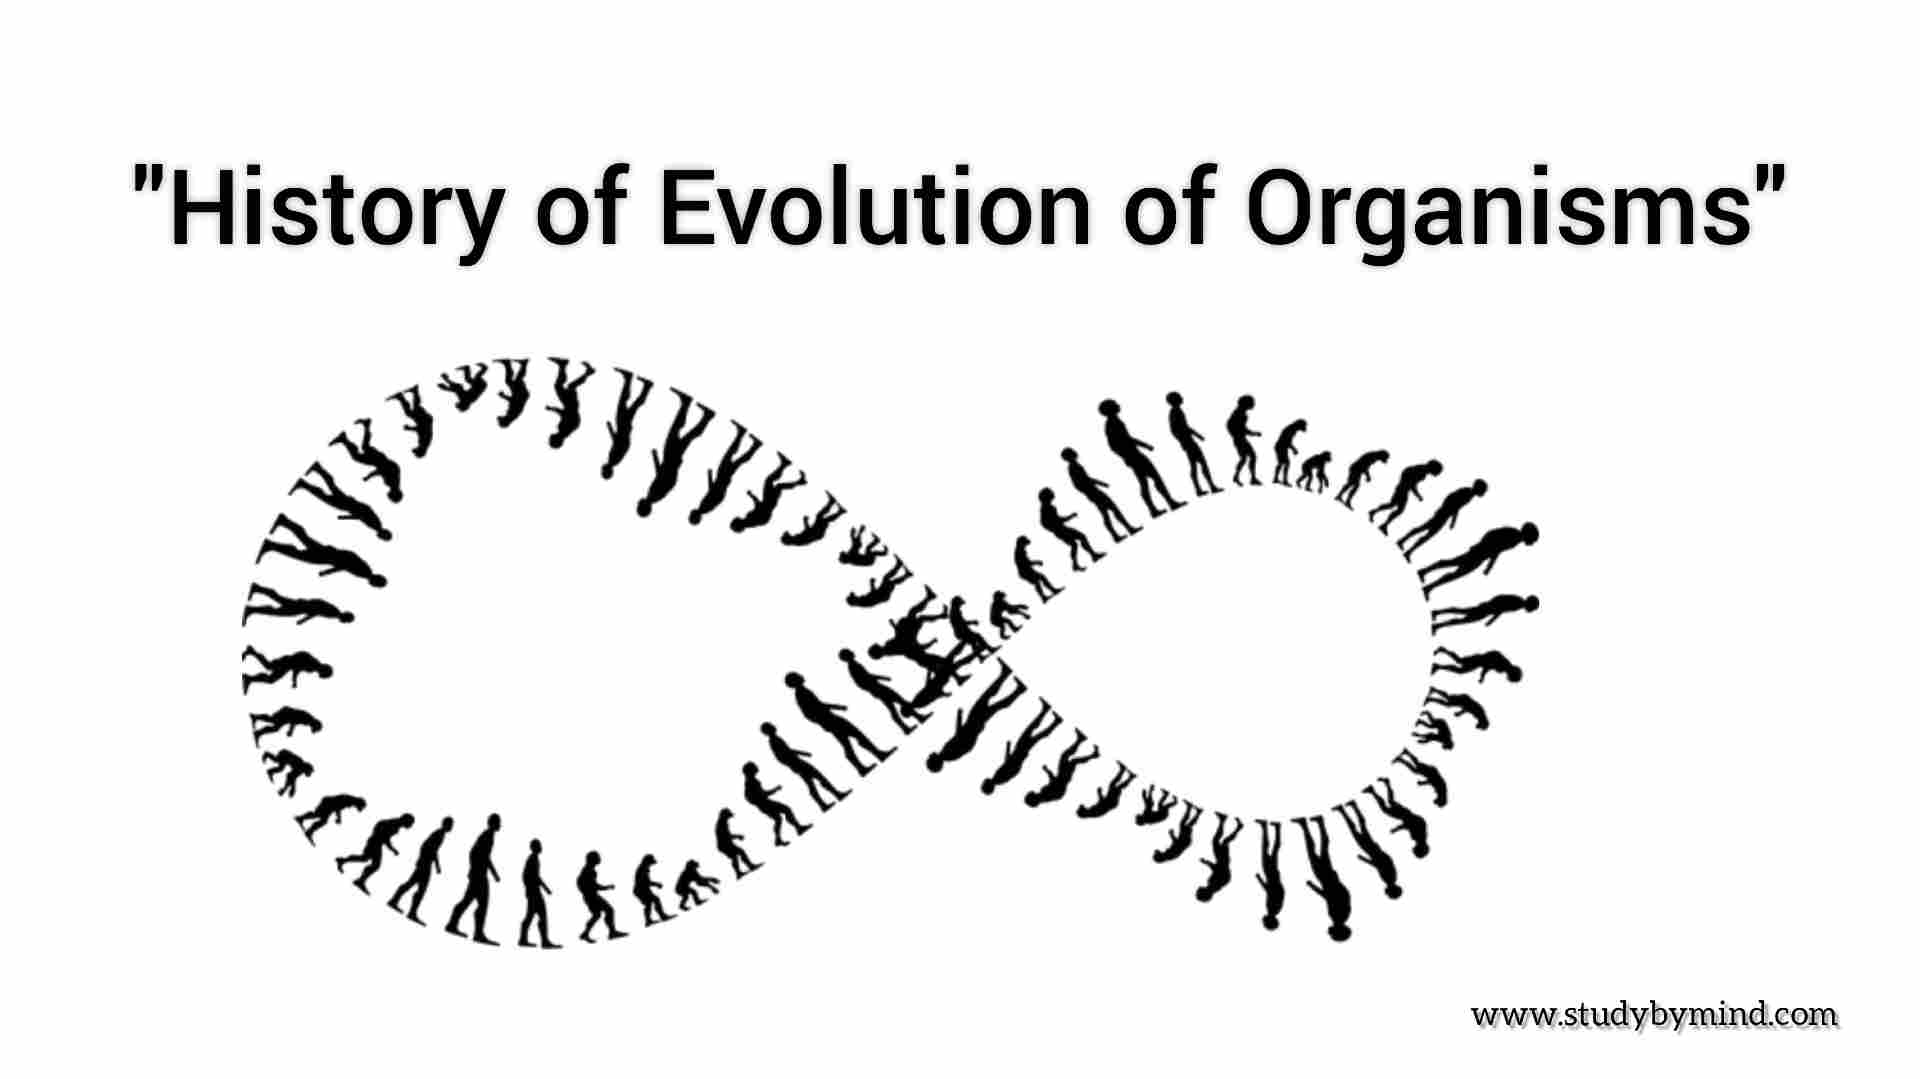 You are currently viewing History of Evolution of Organisms, Civilization and 3 Eras